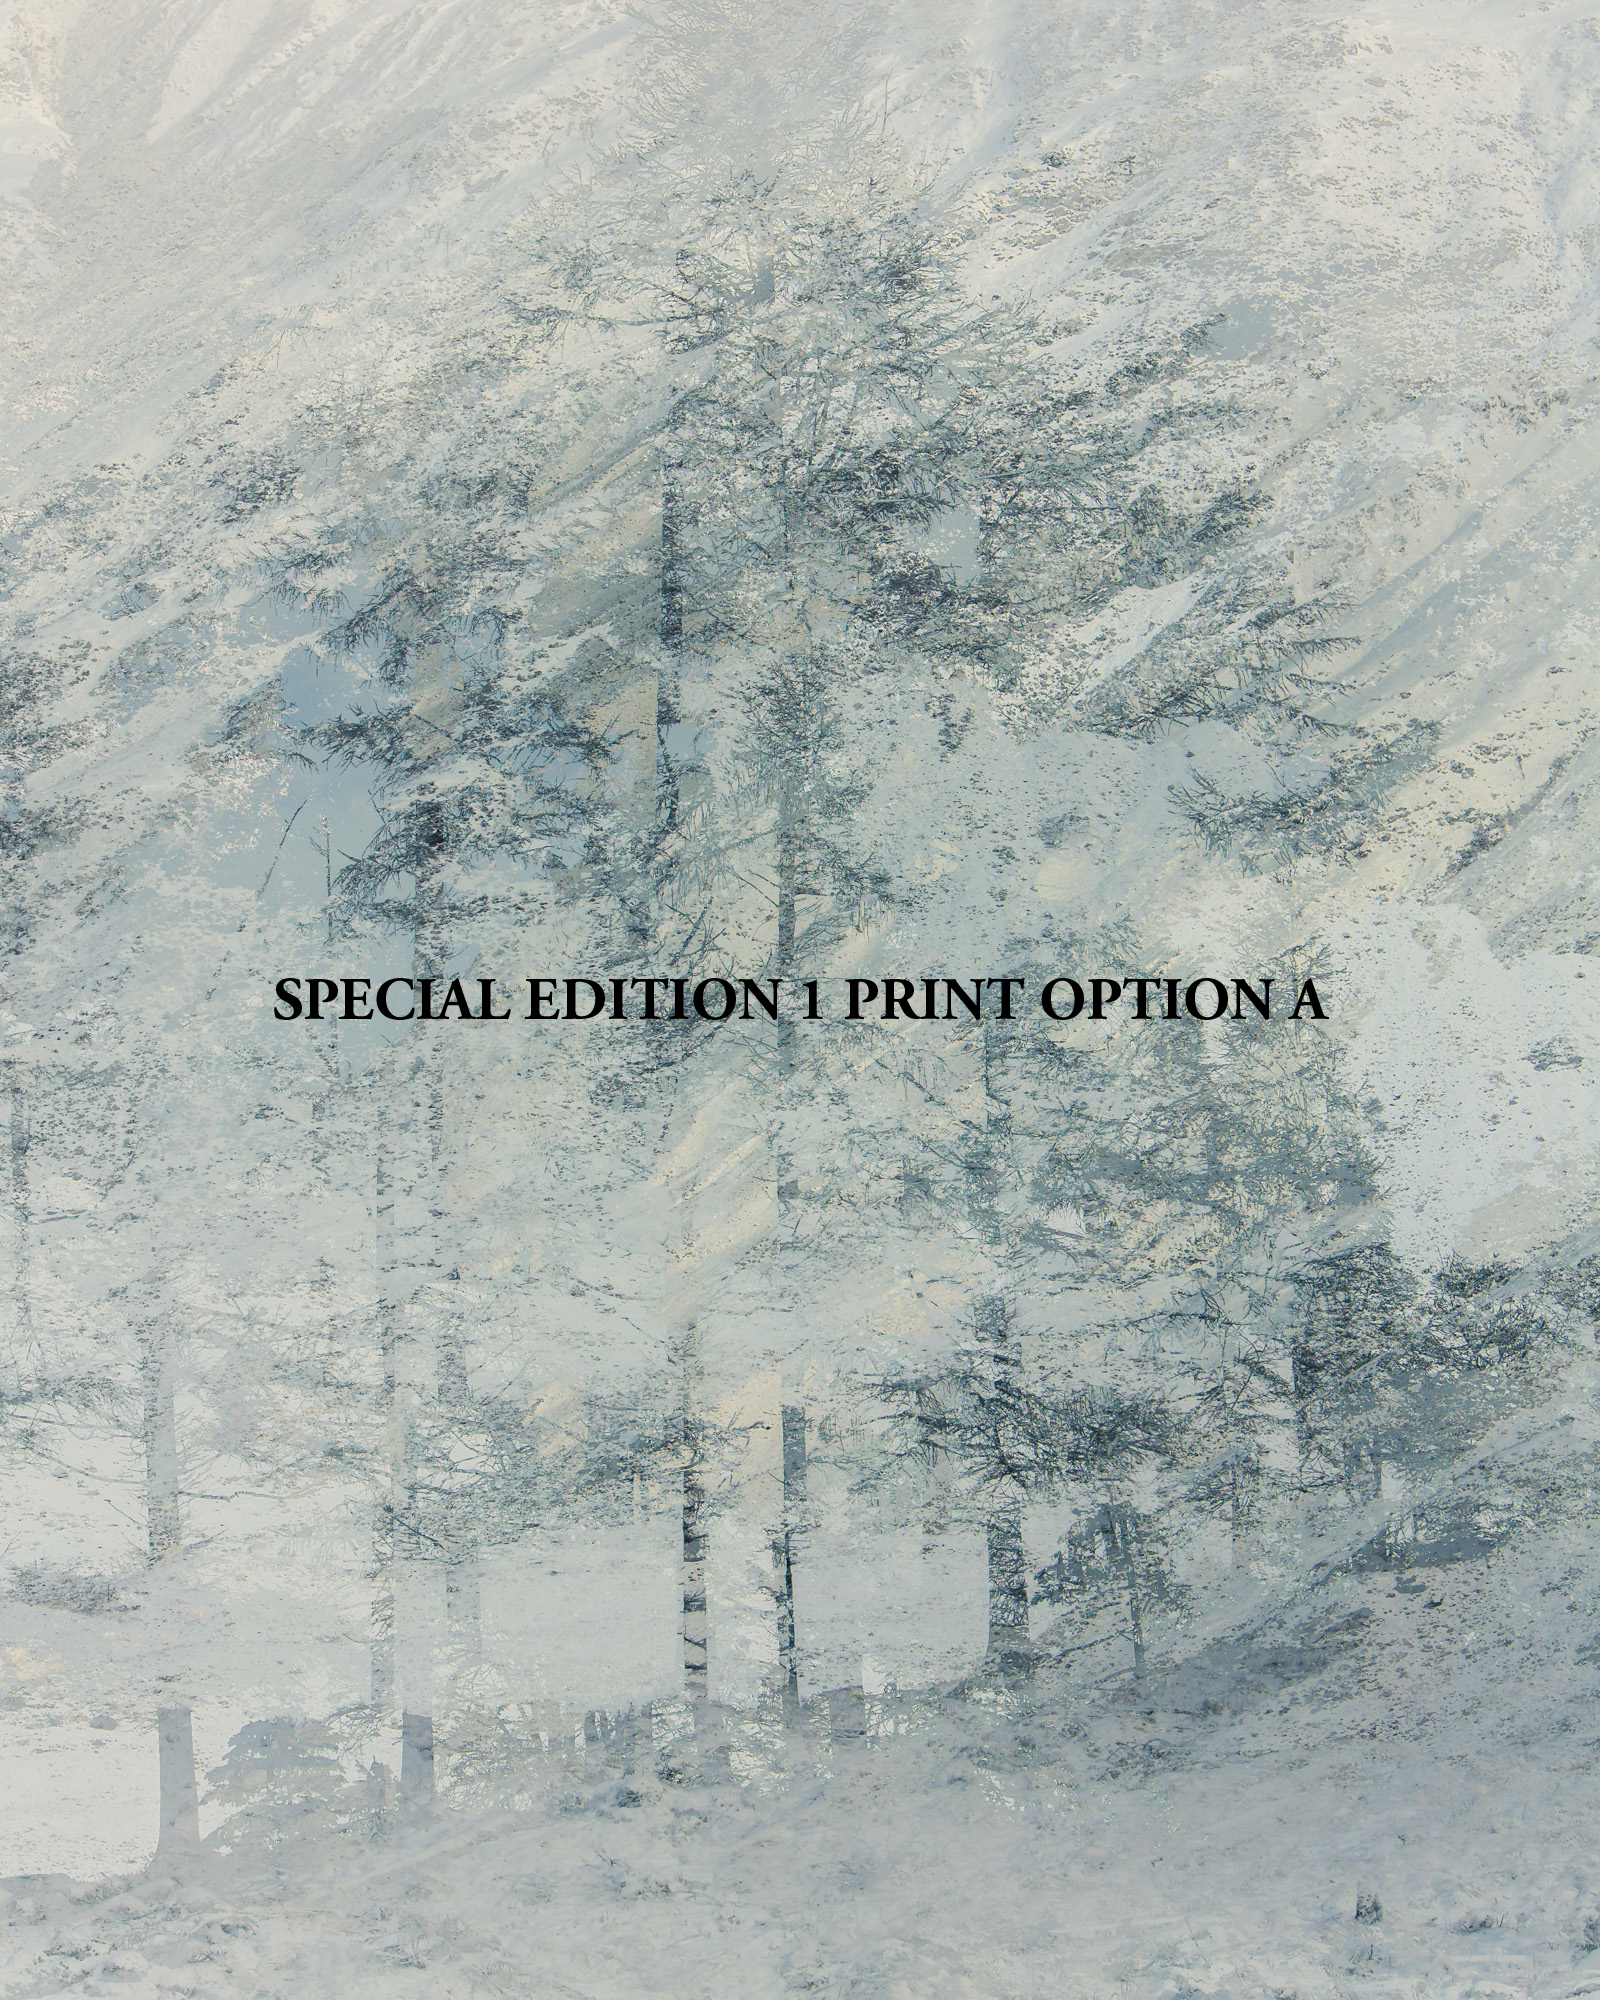 SPECIAL EDITION 1 PRINT A